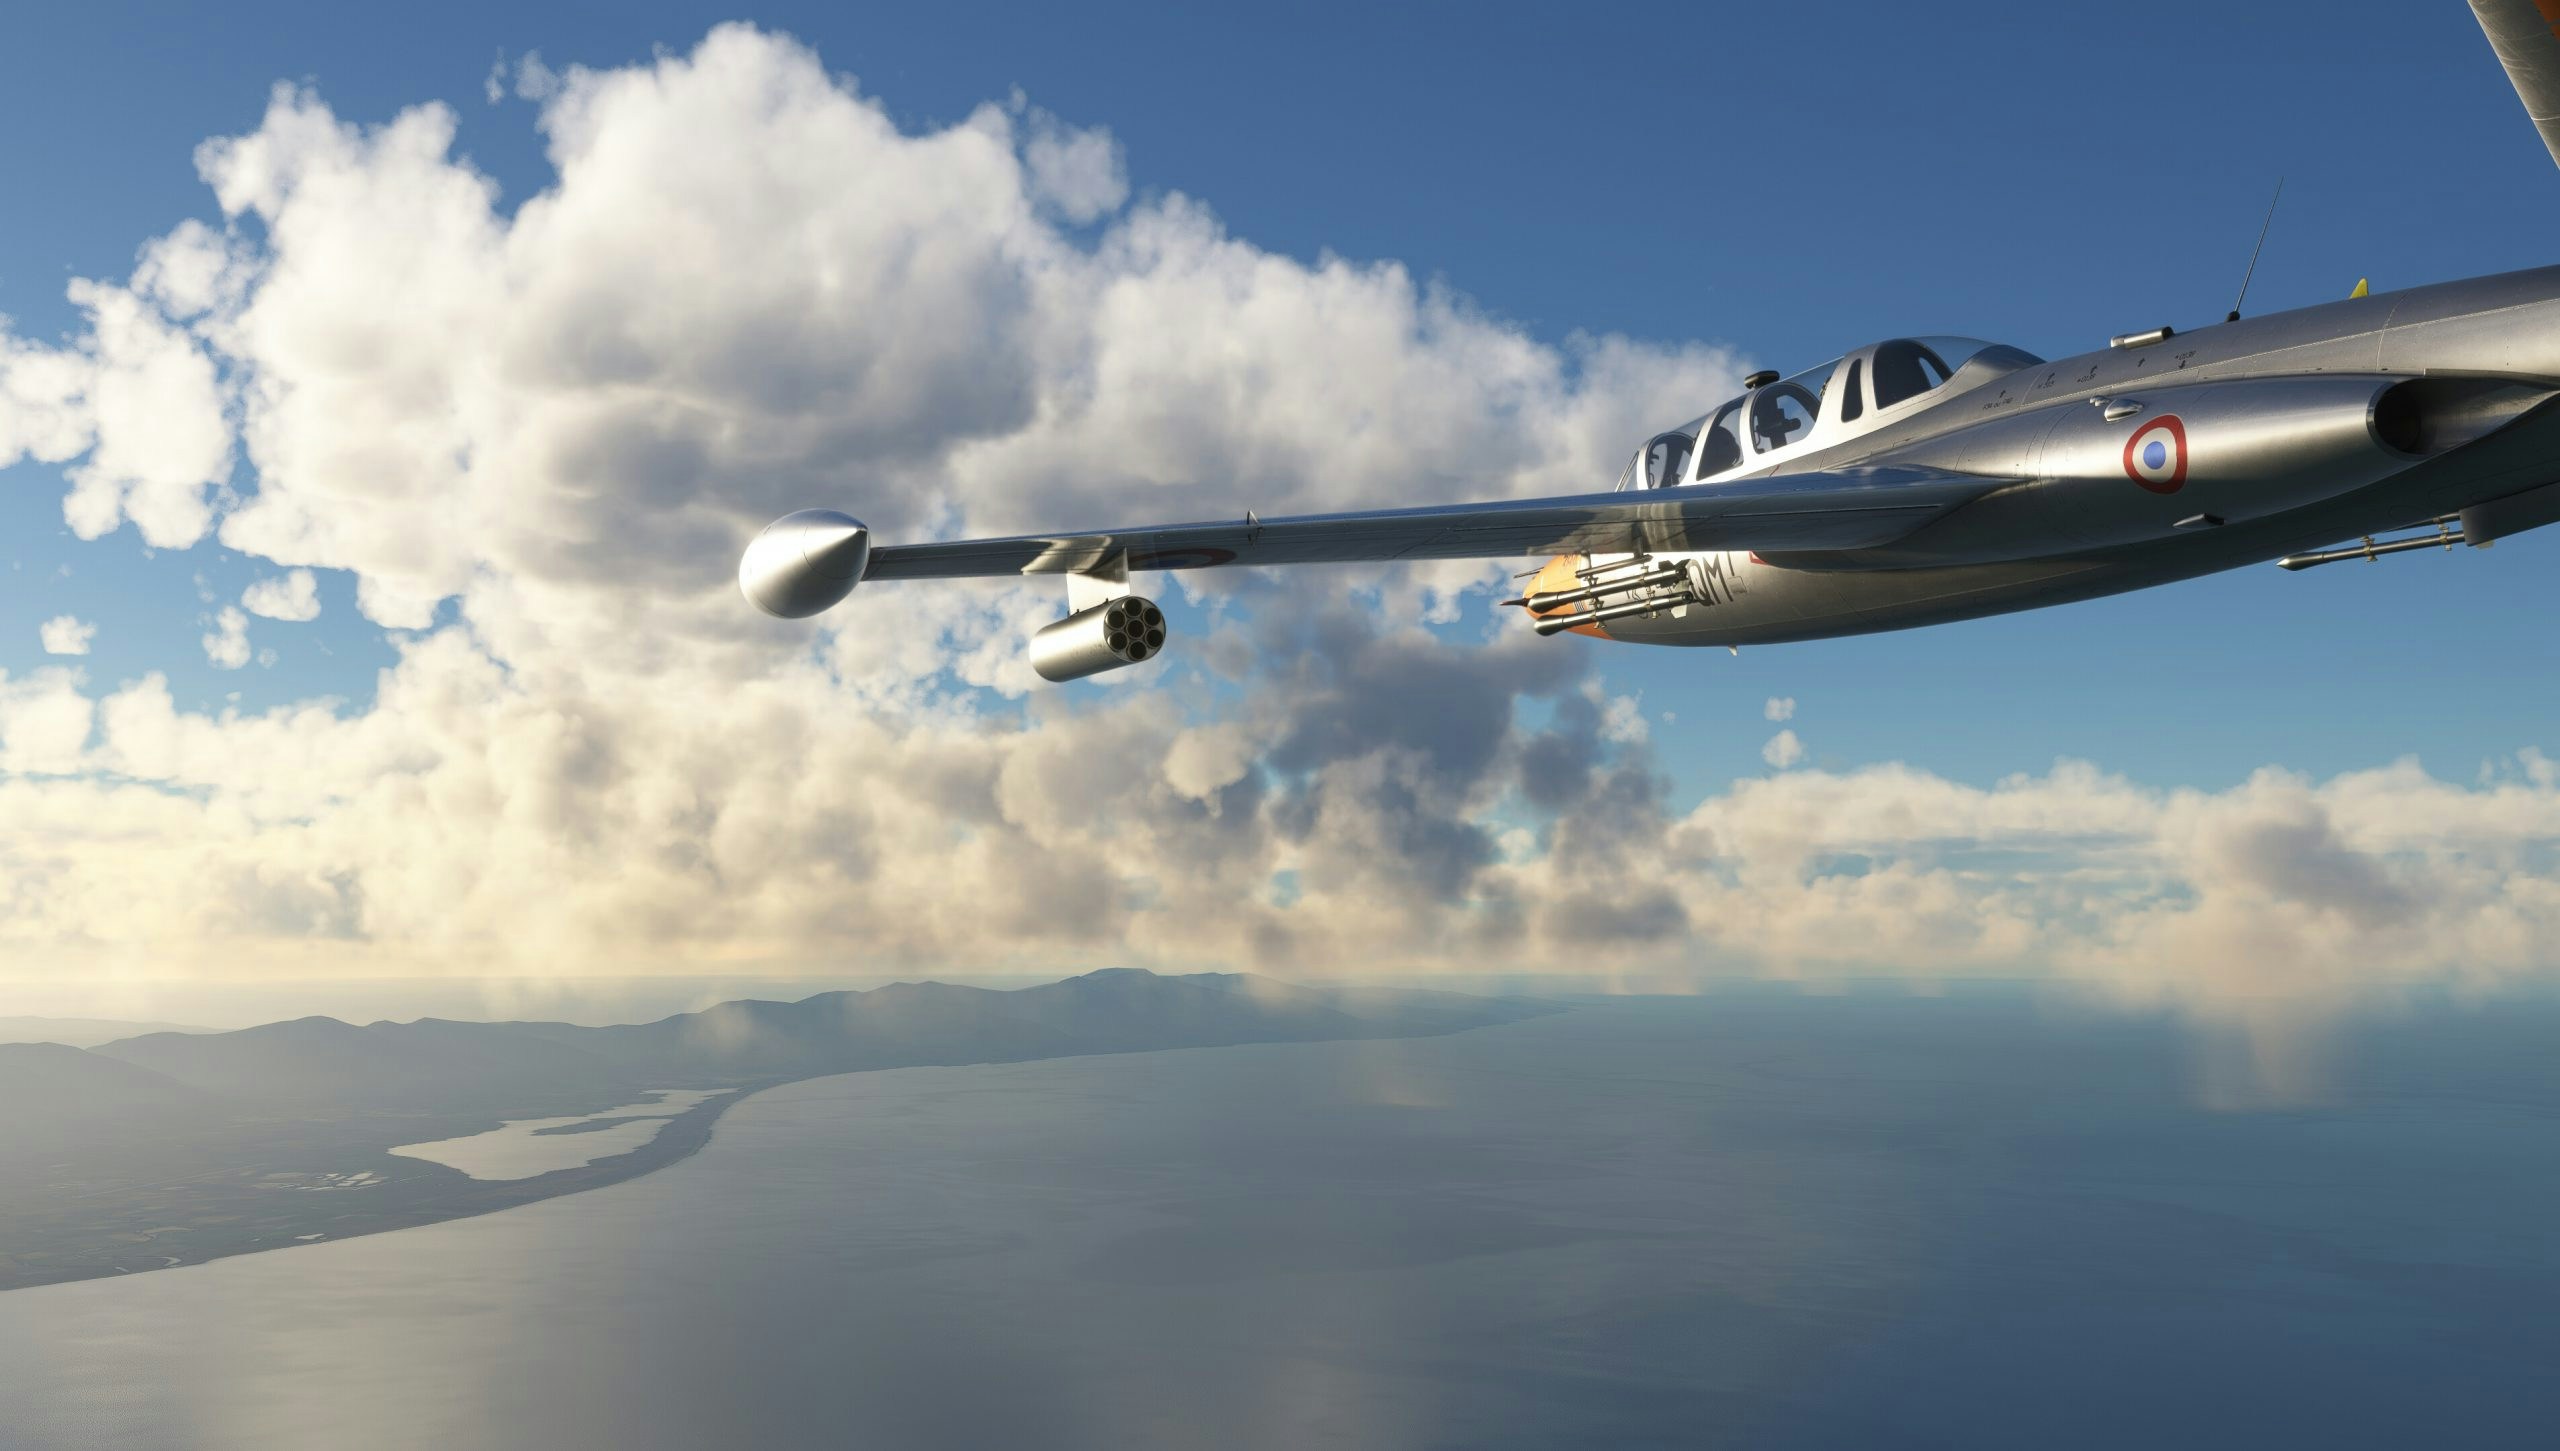 AzurPoly Releases Fouga CM.170 Magister for MSFS